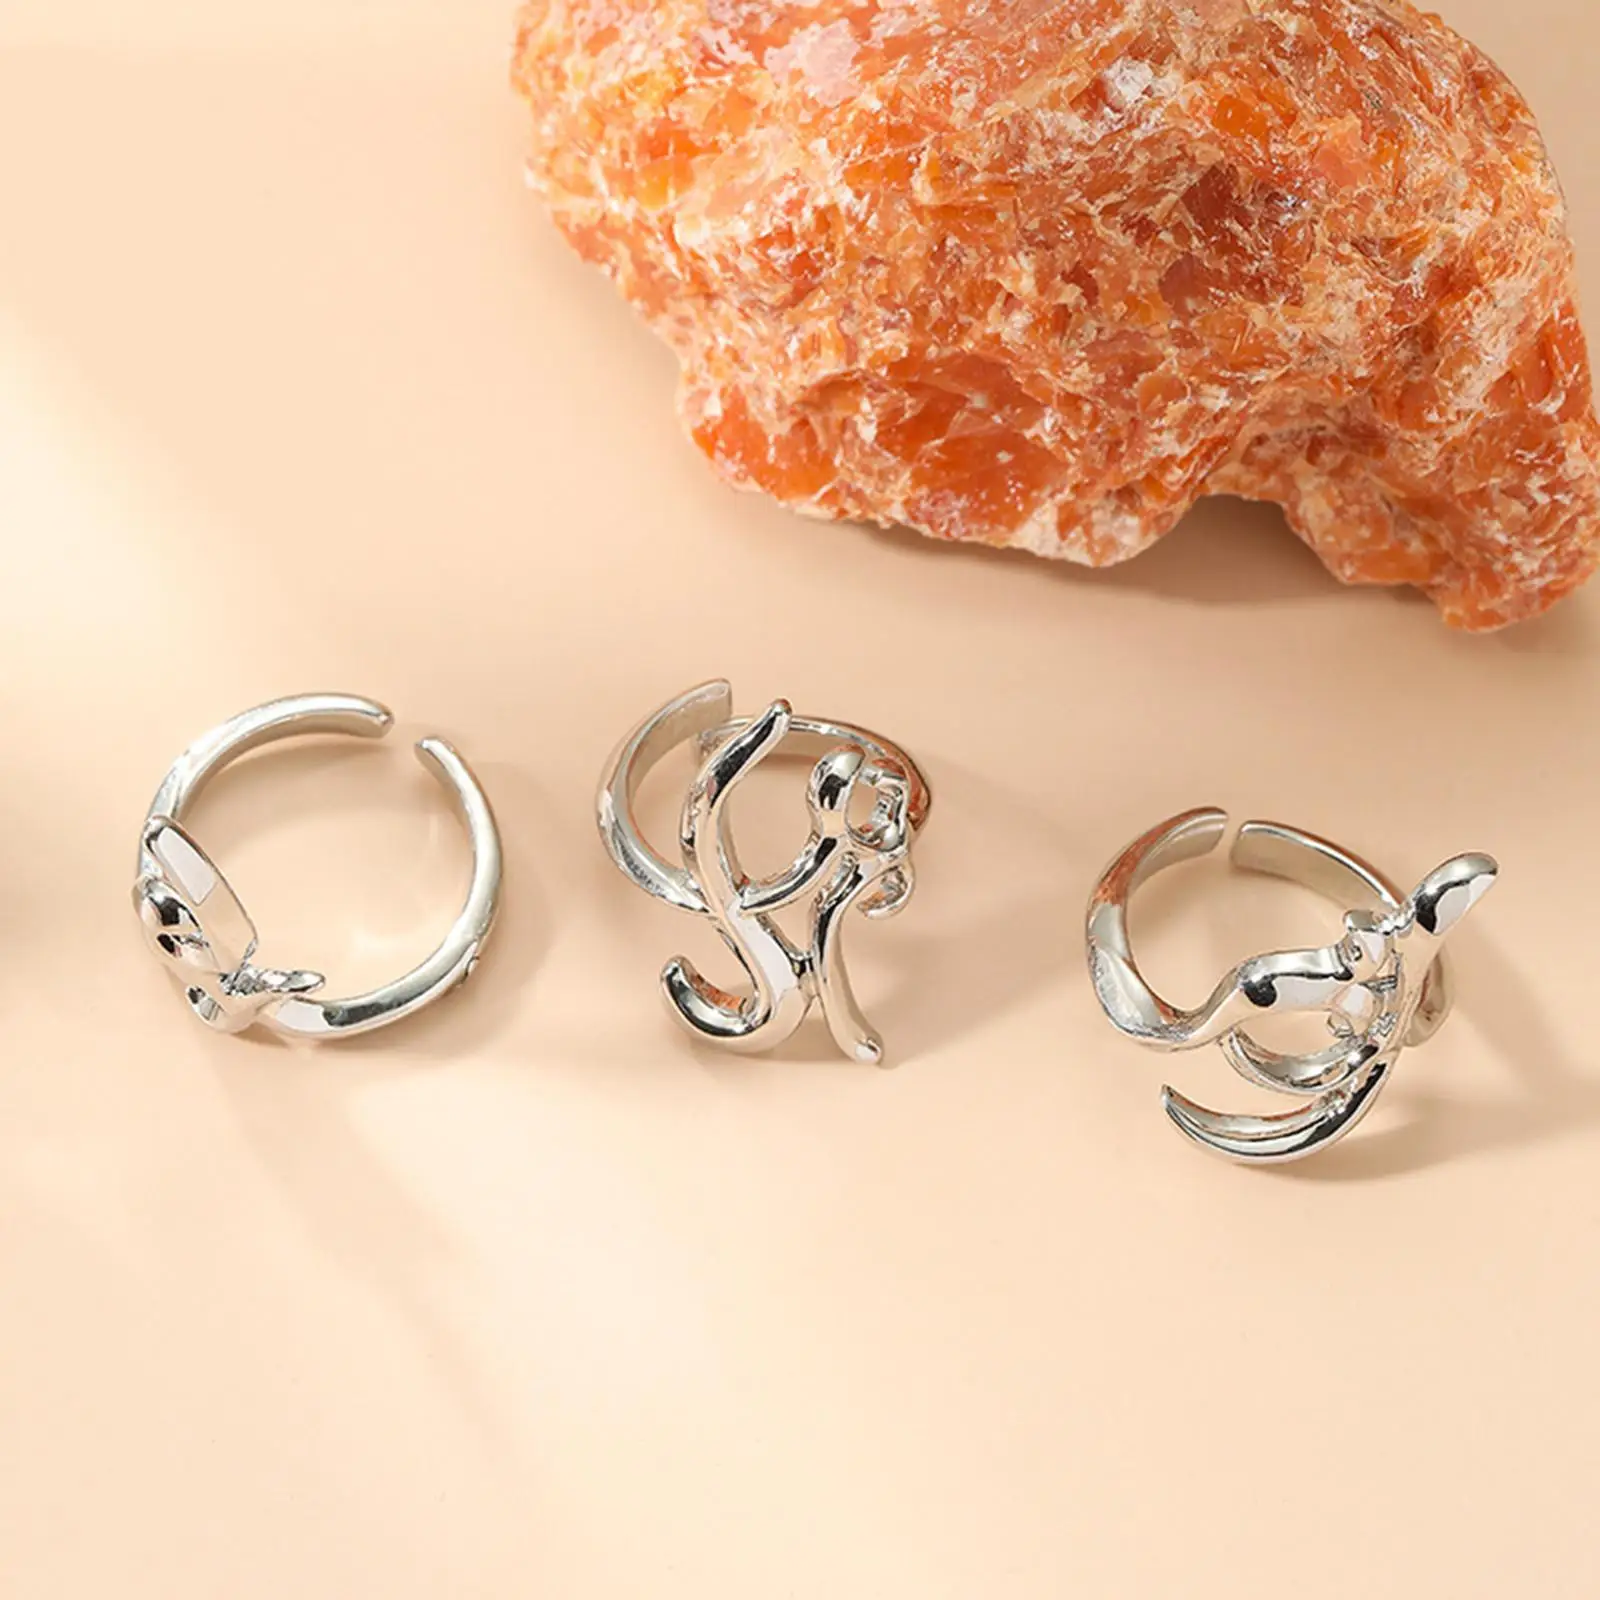 3Pcs Adjustable Fingernail Opening Rings for Women Nail Art Charms Jewelry